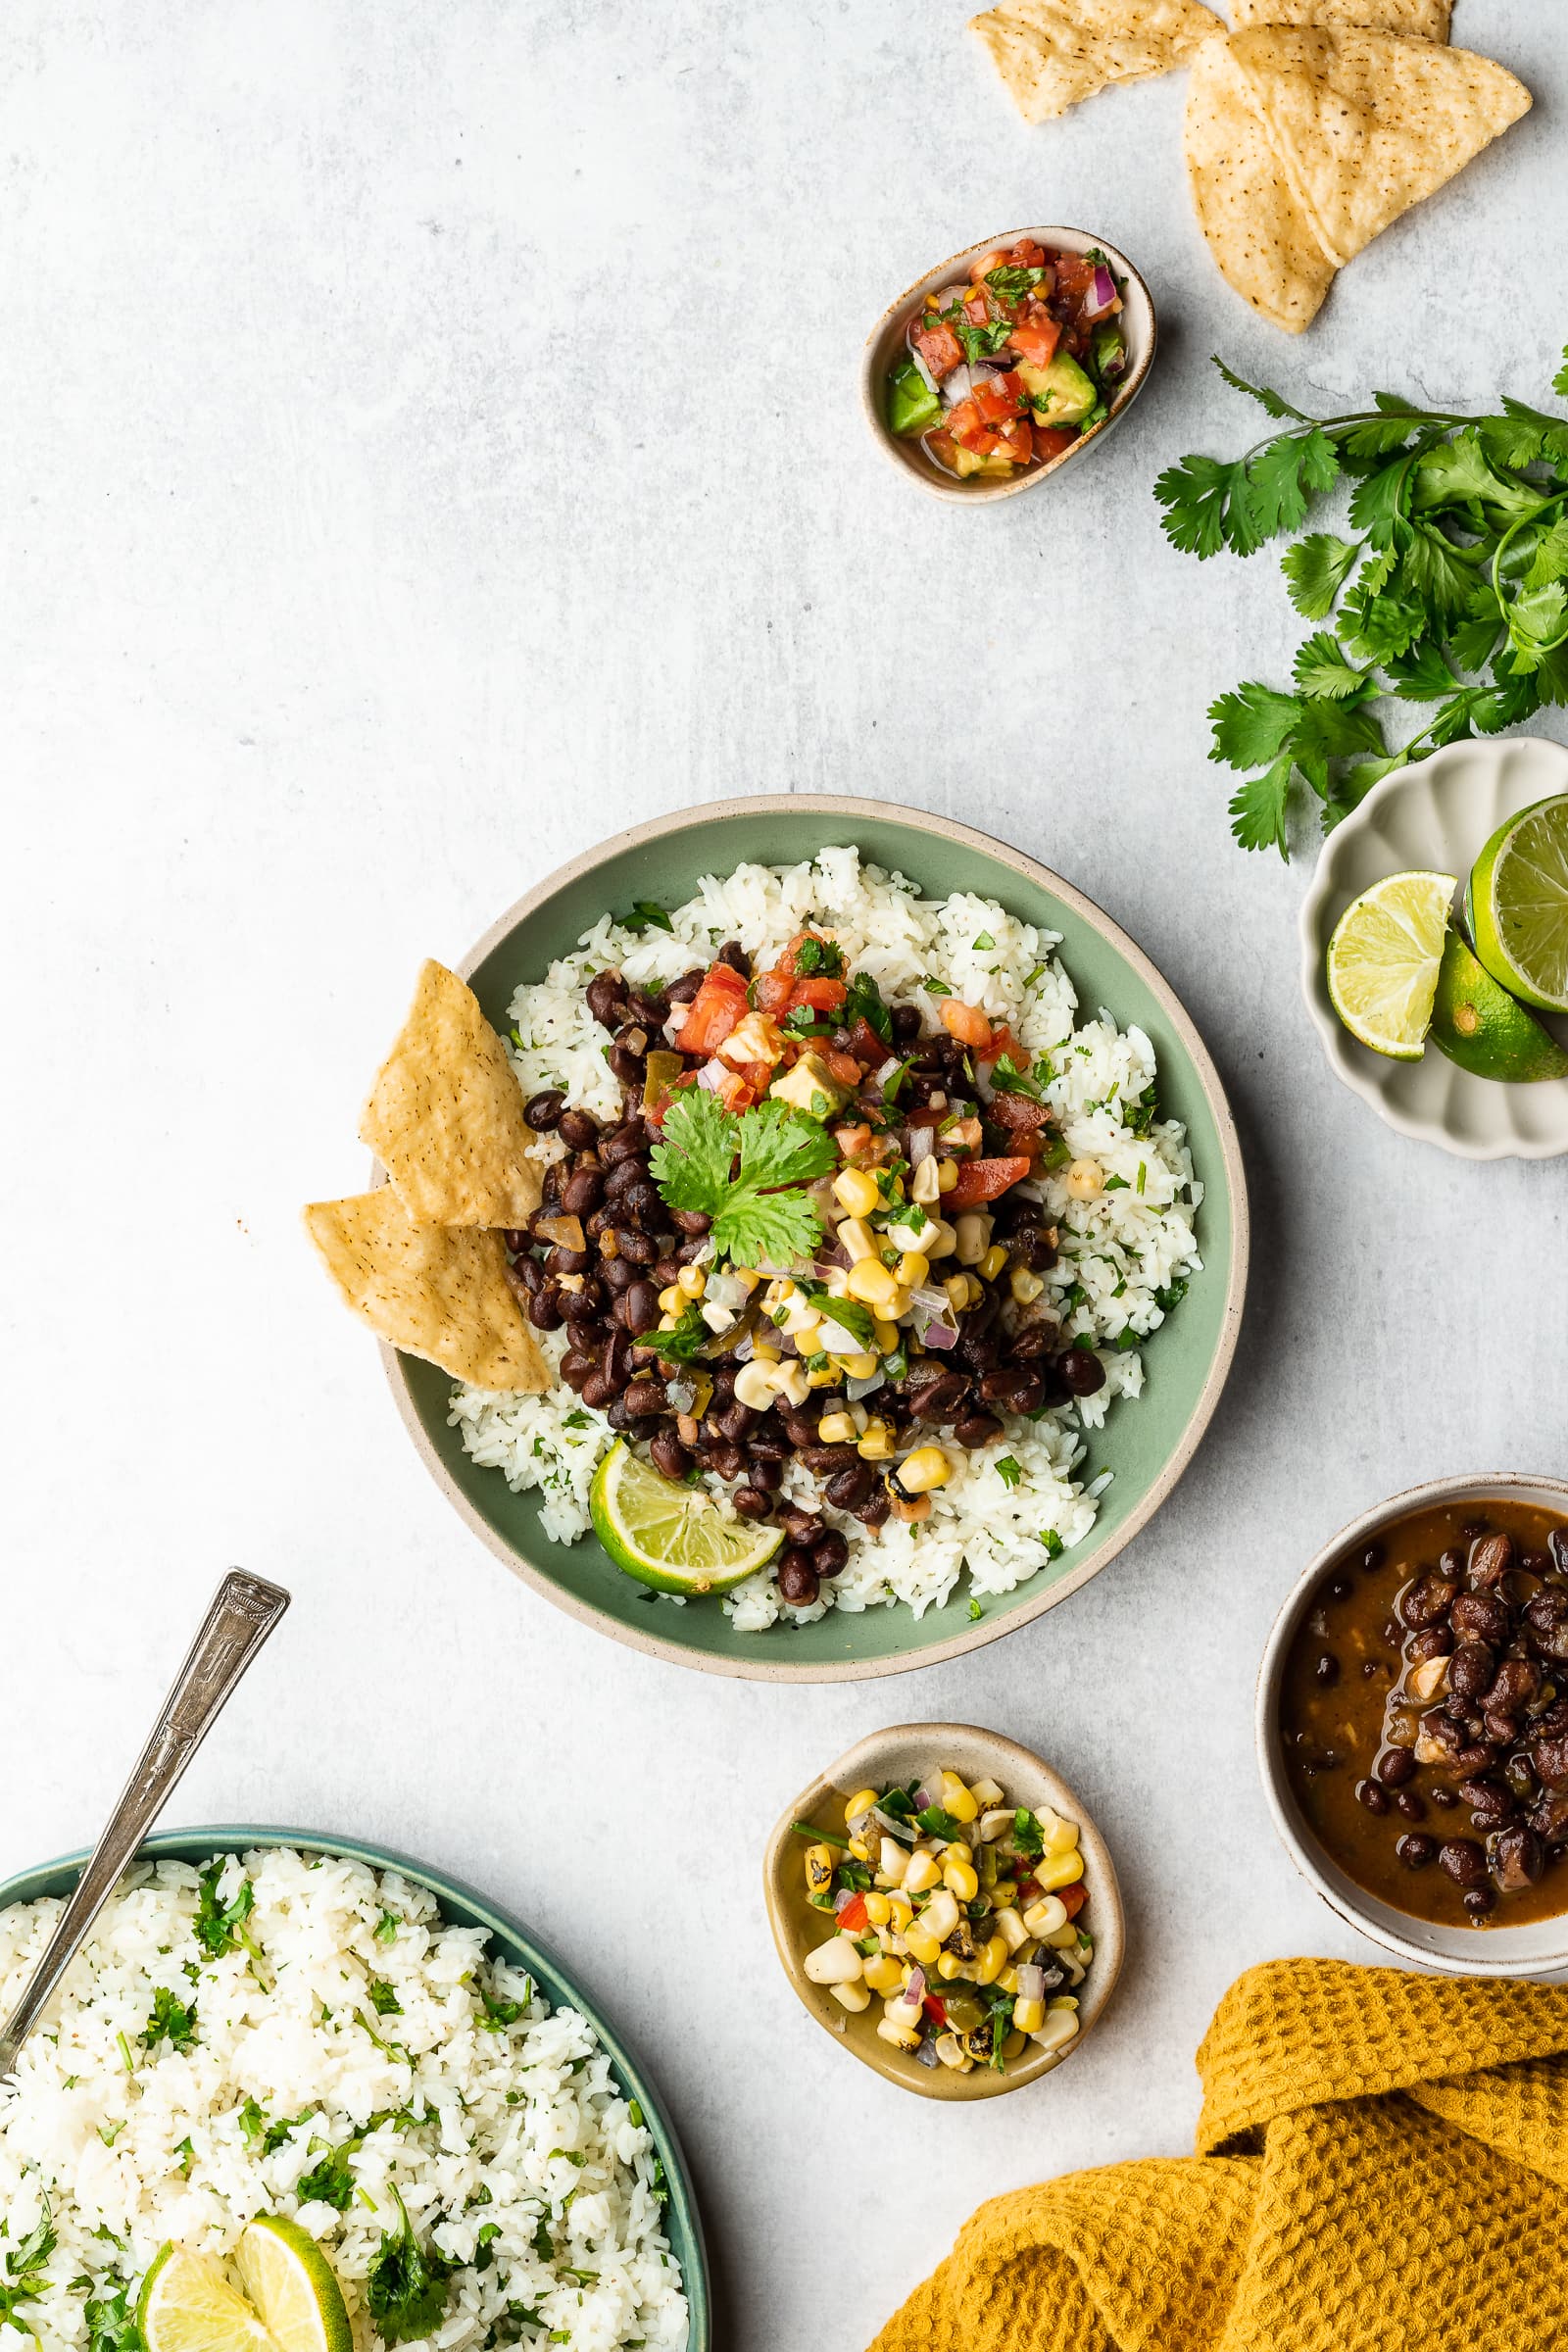 Cilantro lime rice, black beans, and salsa in a shallow bowl.